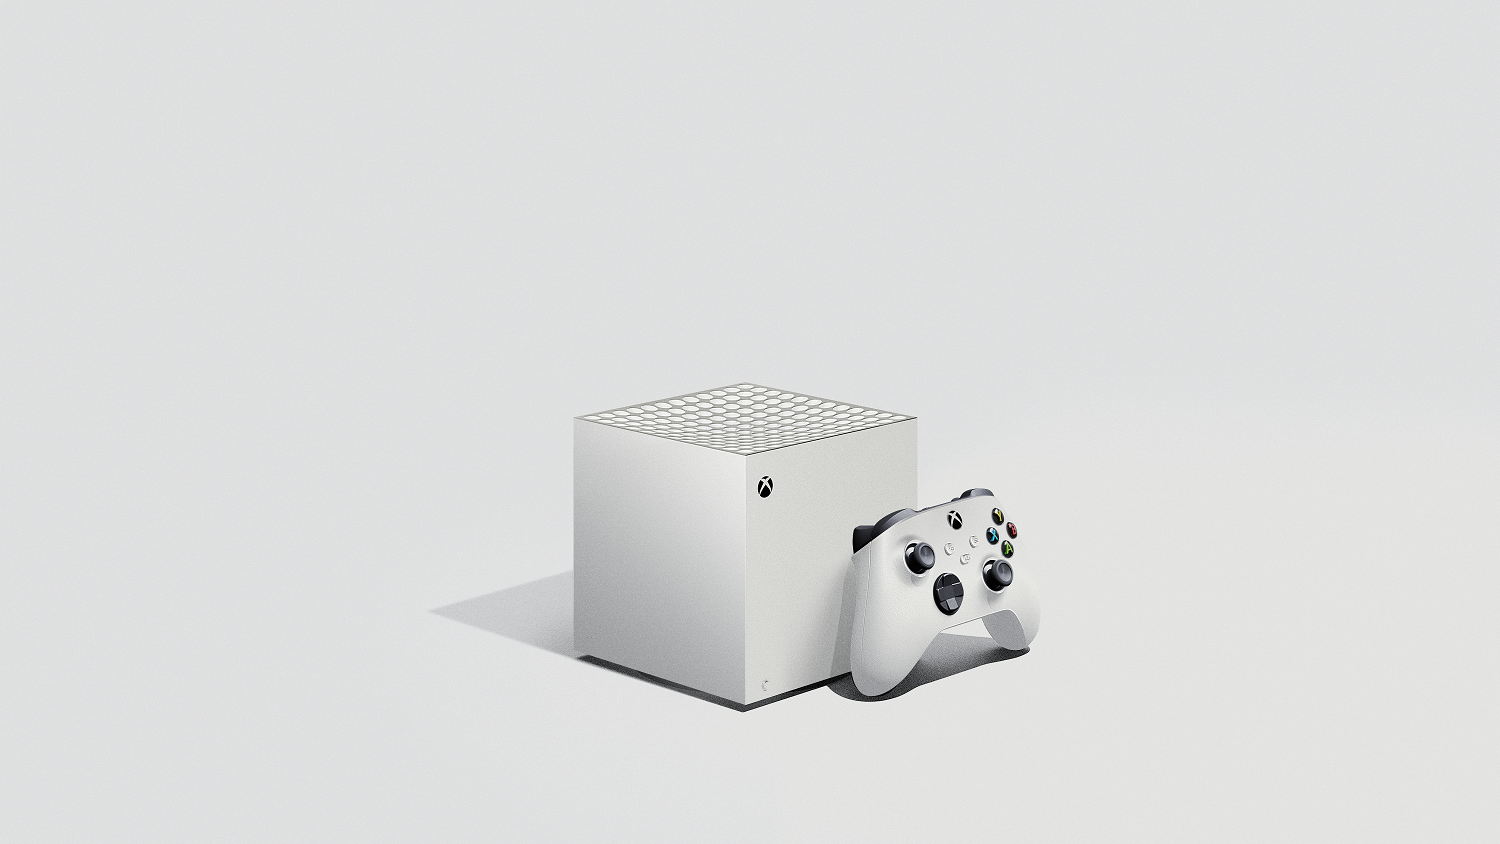 best price for an xbox one